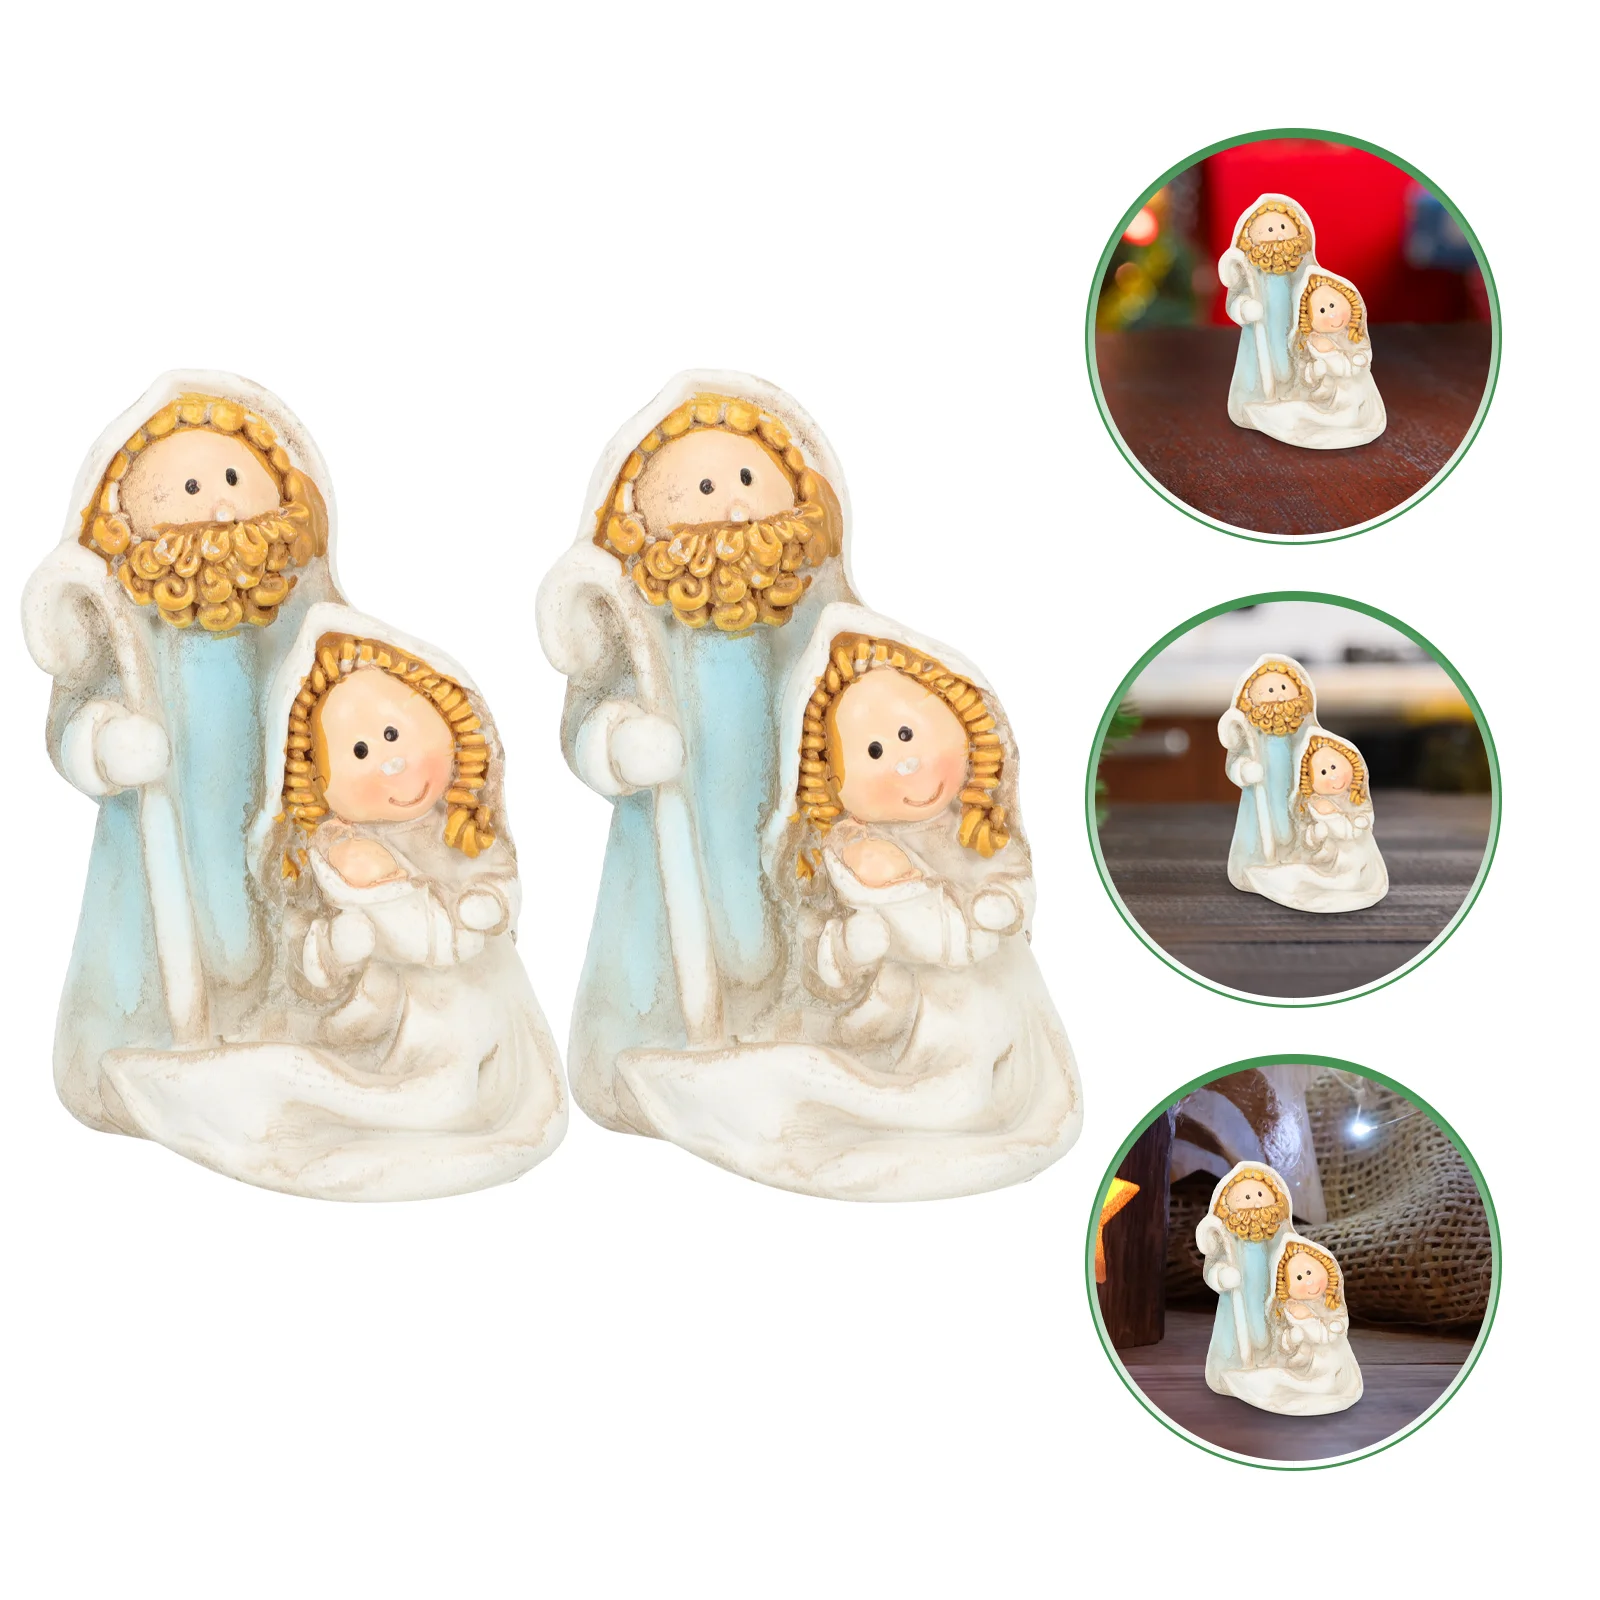 

Nativity Statue Religious Jesus Holy Set Family Figurine Sculpture Resin Anthony St Gifts Statues Manger Scene Figures Mini